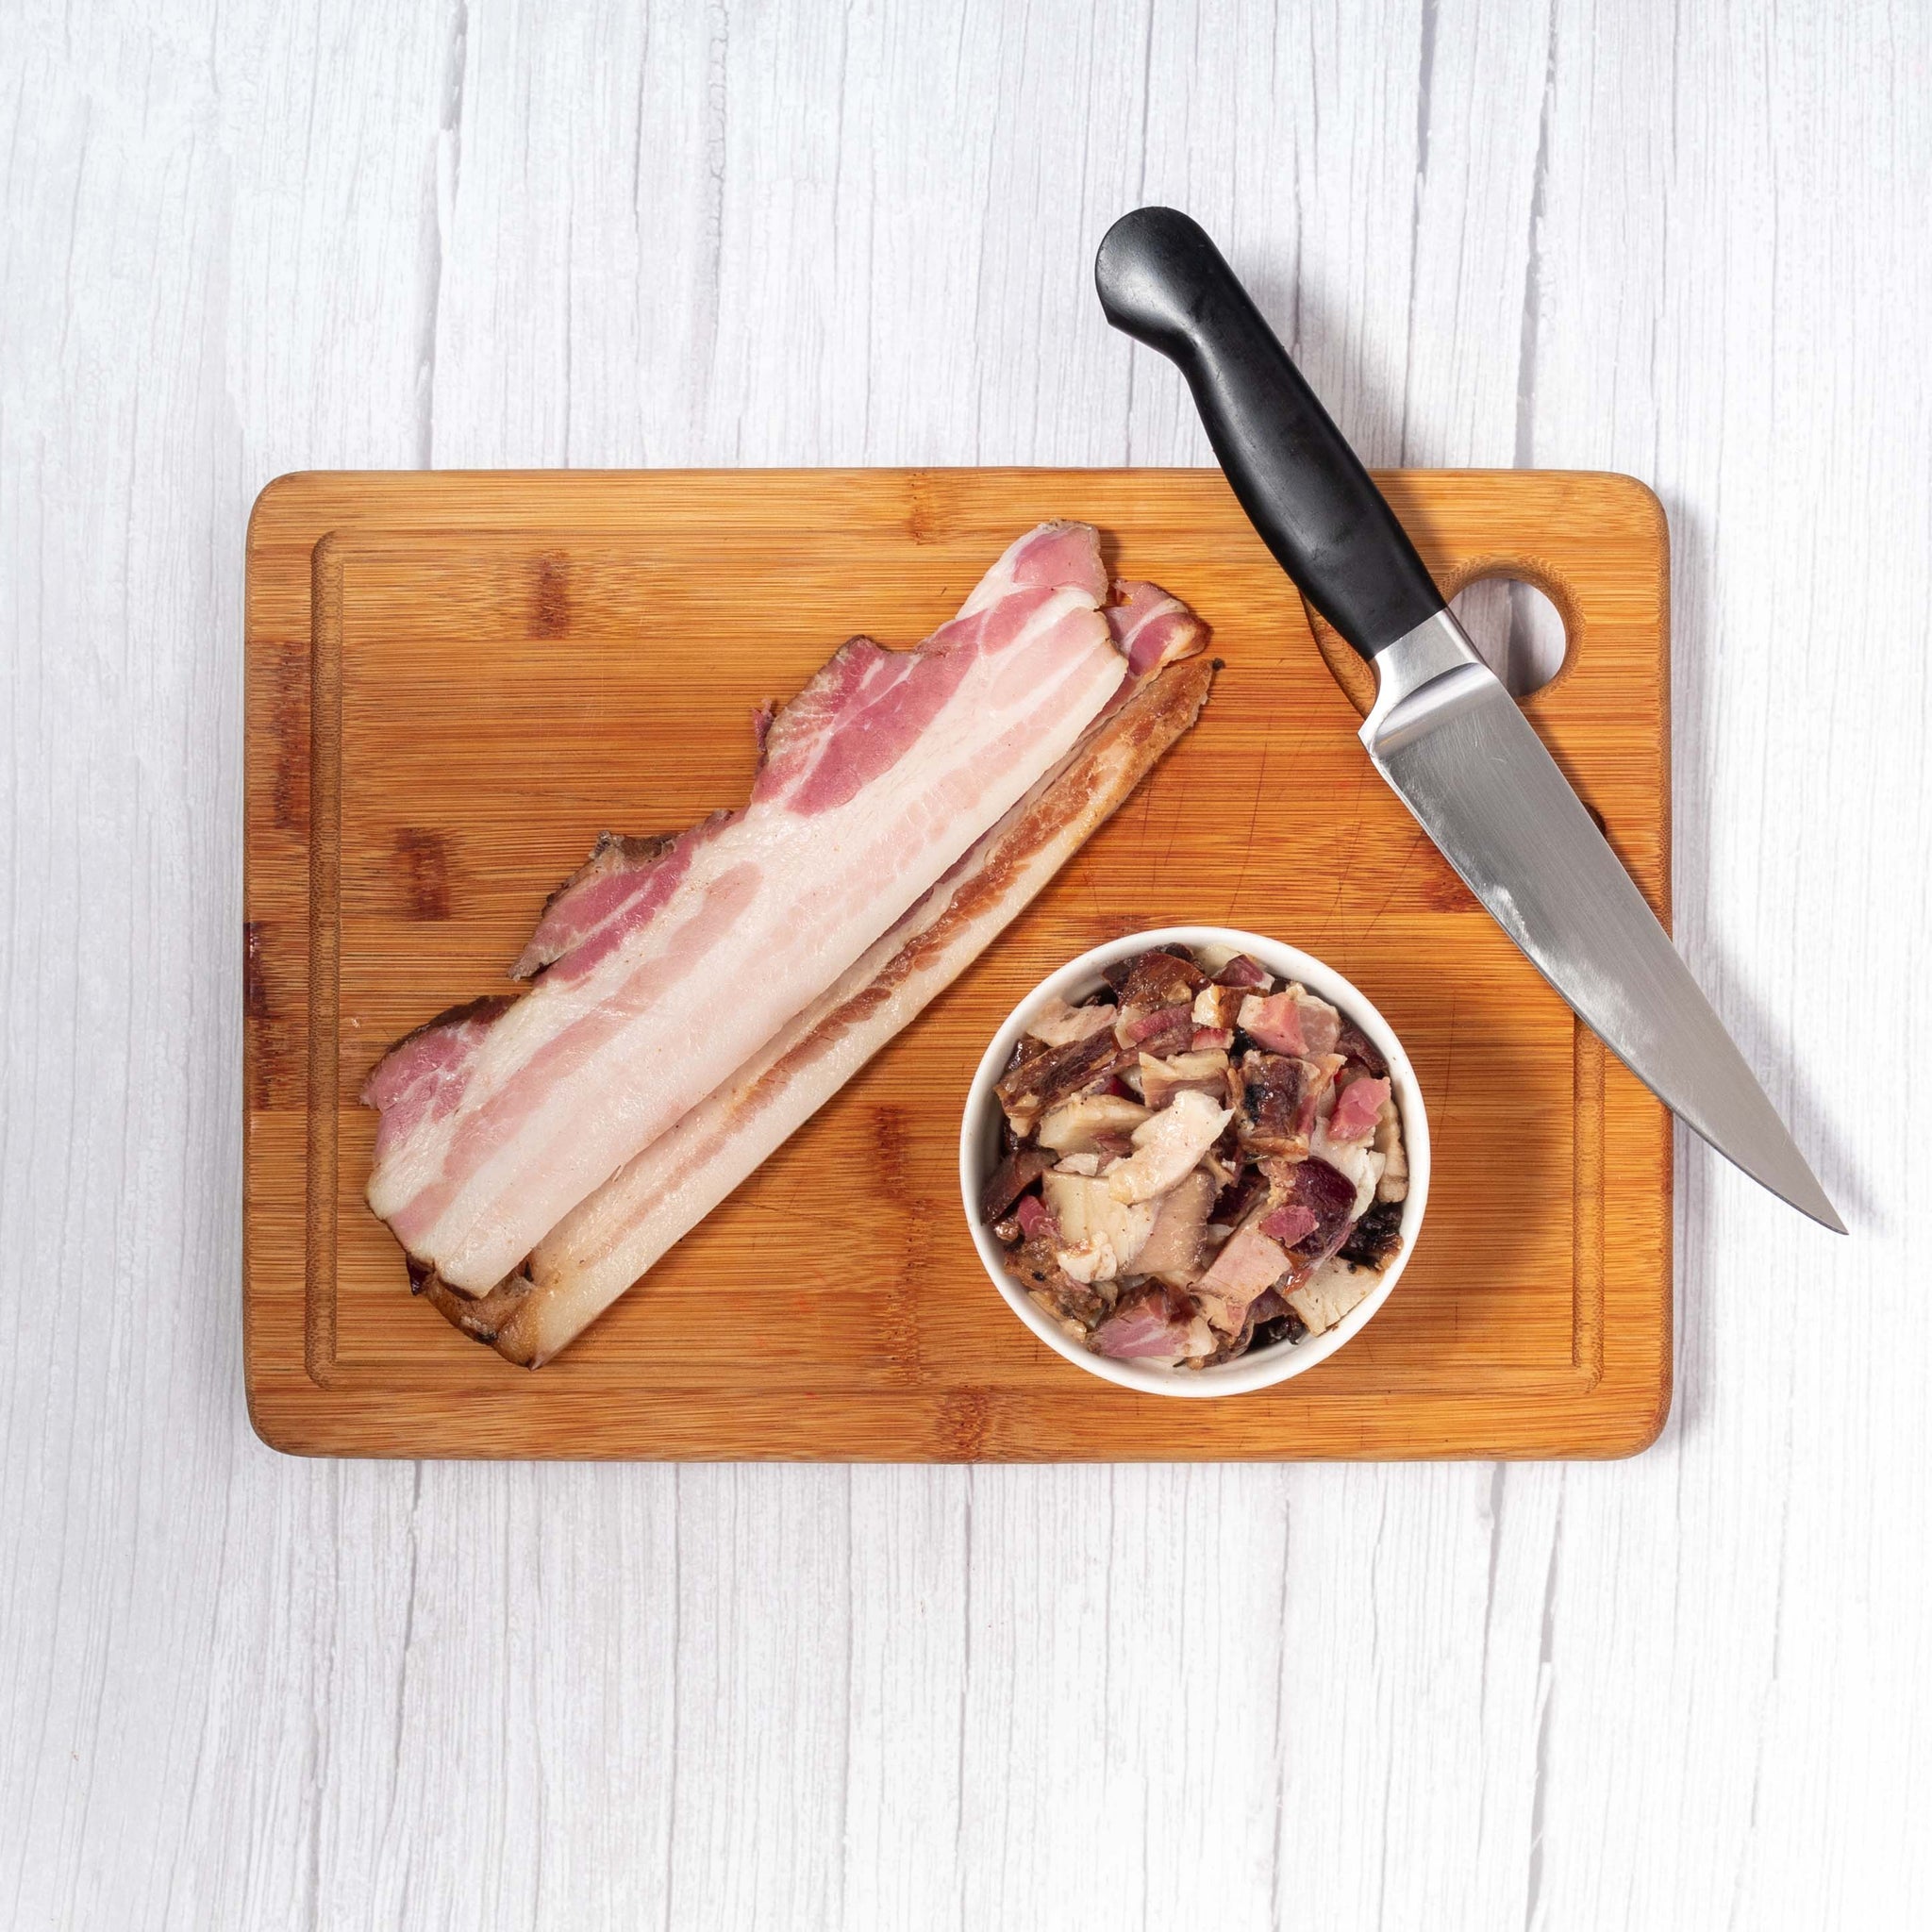 Slices of Smoked Bacon with Chopped up Nitrite-free Smoked Bacon Bits on the side, with a silver knife next to it, all placed on top a wooden chopping board.